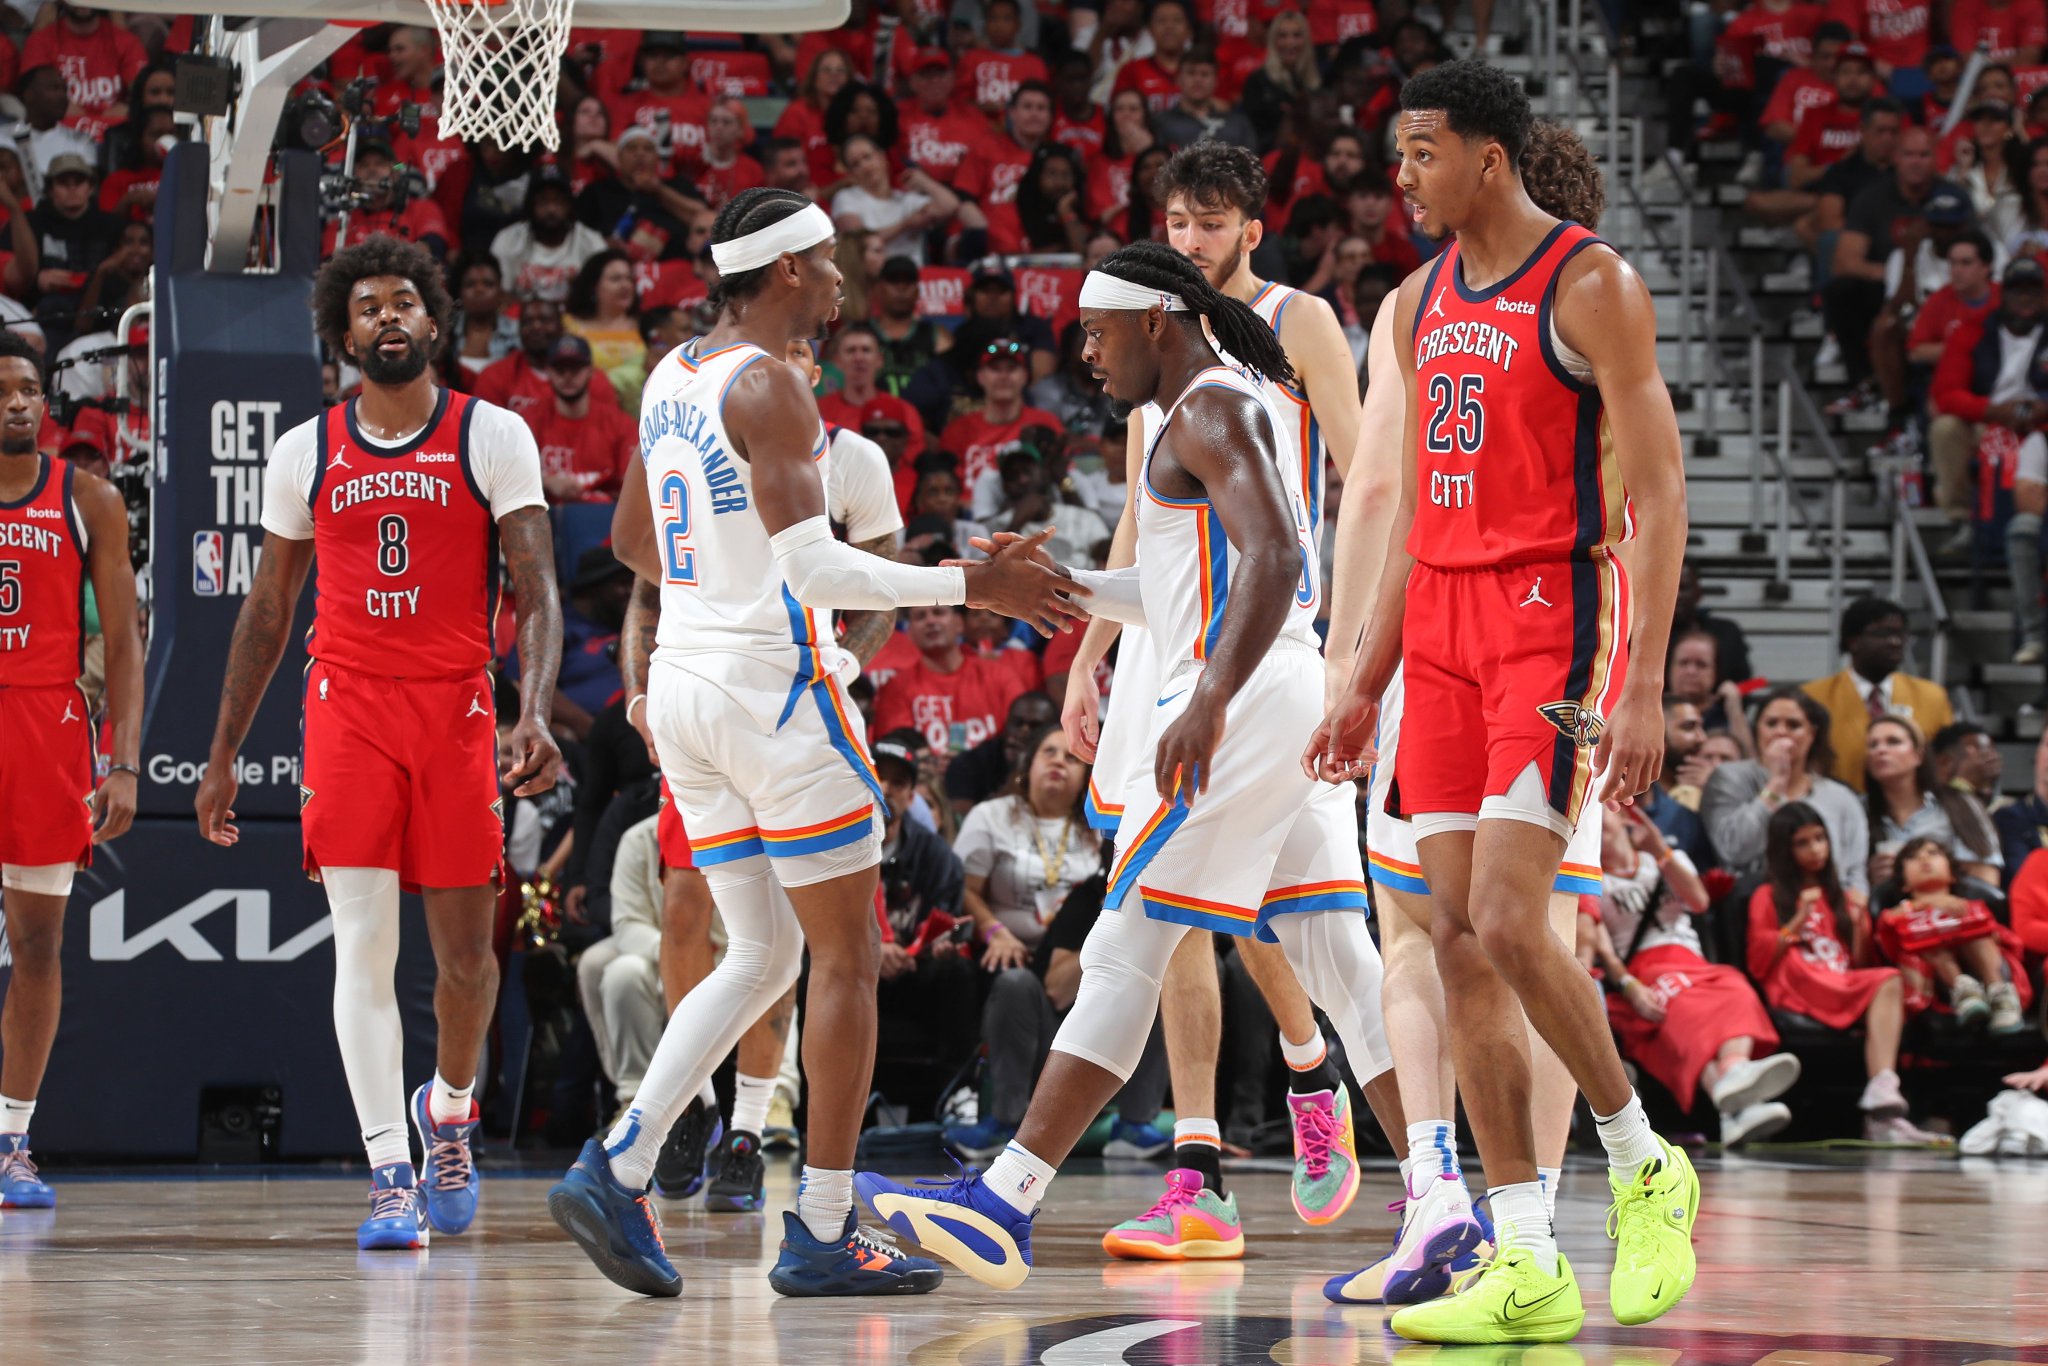 Pelicans Fight & Fight In Game 3 Against Thunder But OKC Just Too Poised & Take A 3-0 Series Lead